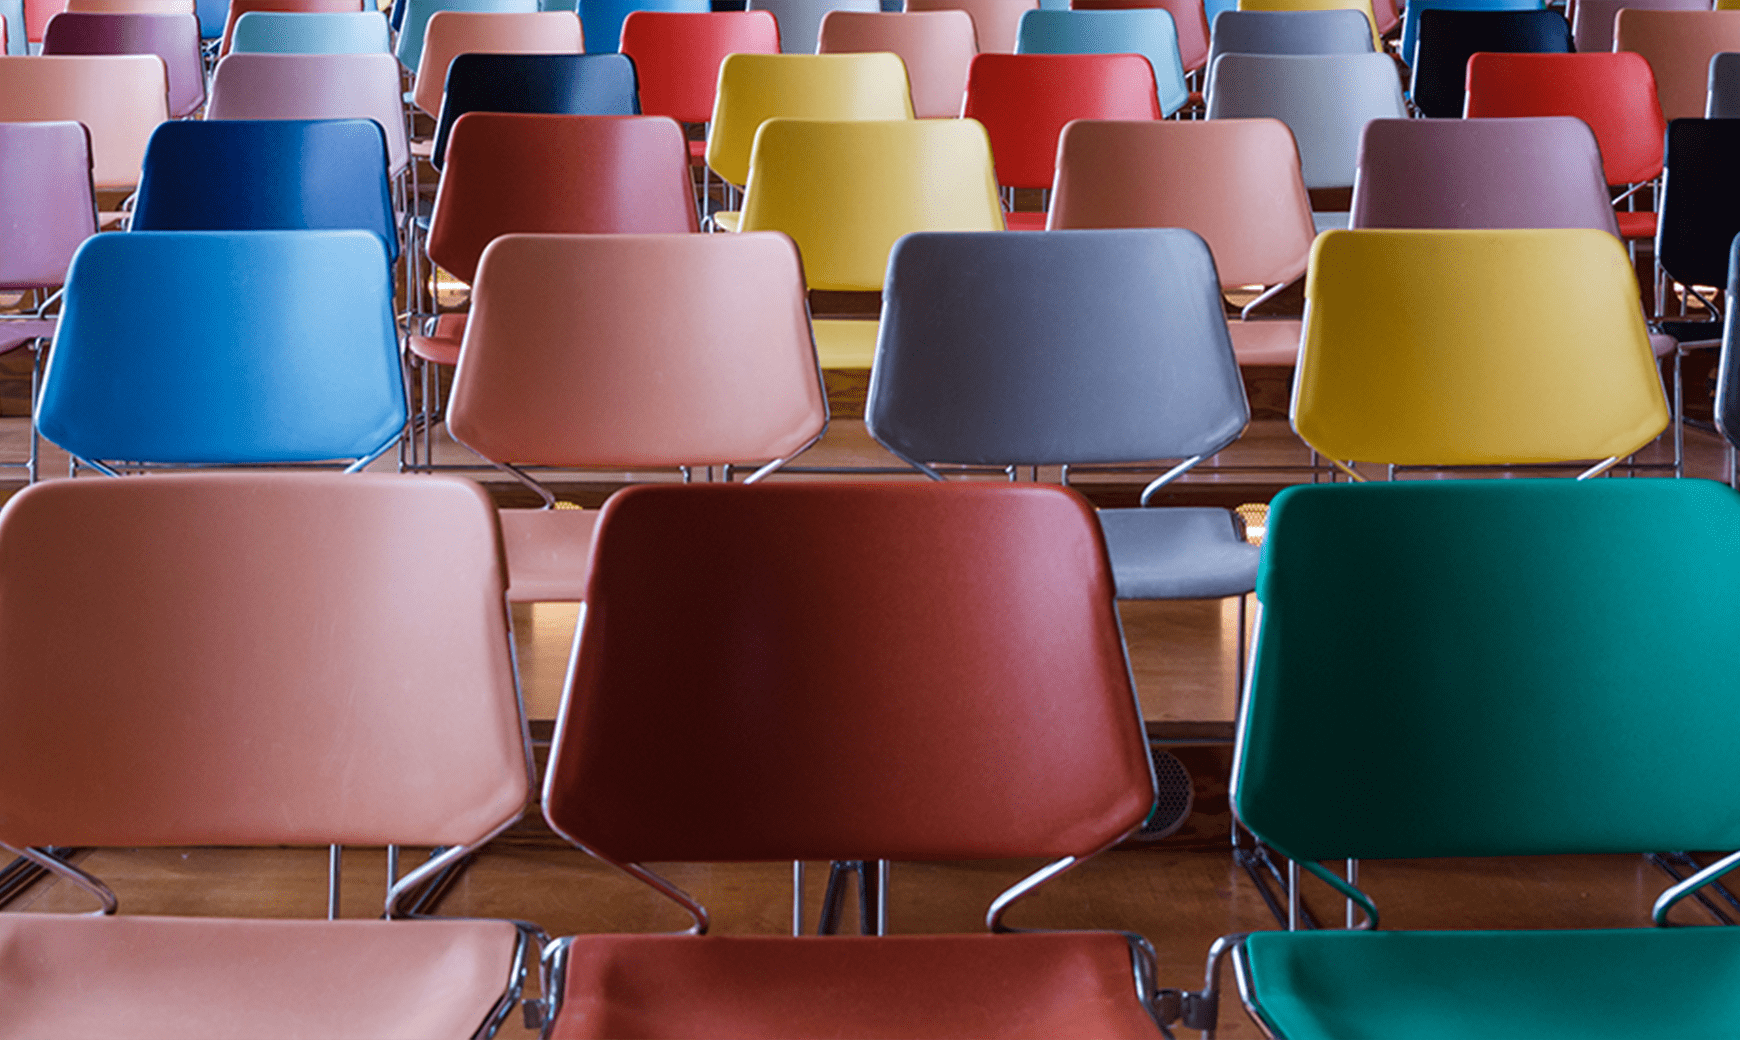 Insights Diversity Multi-Color Chairs